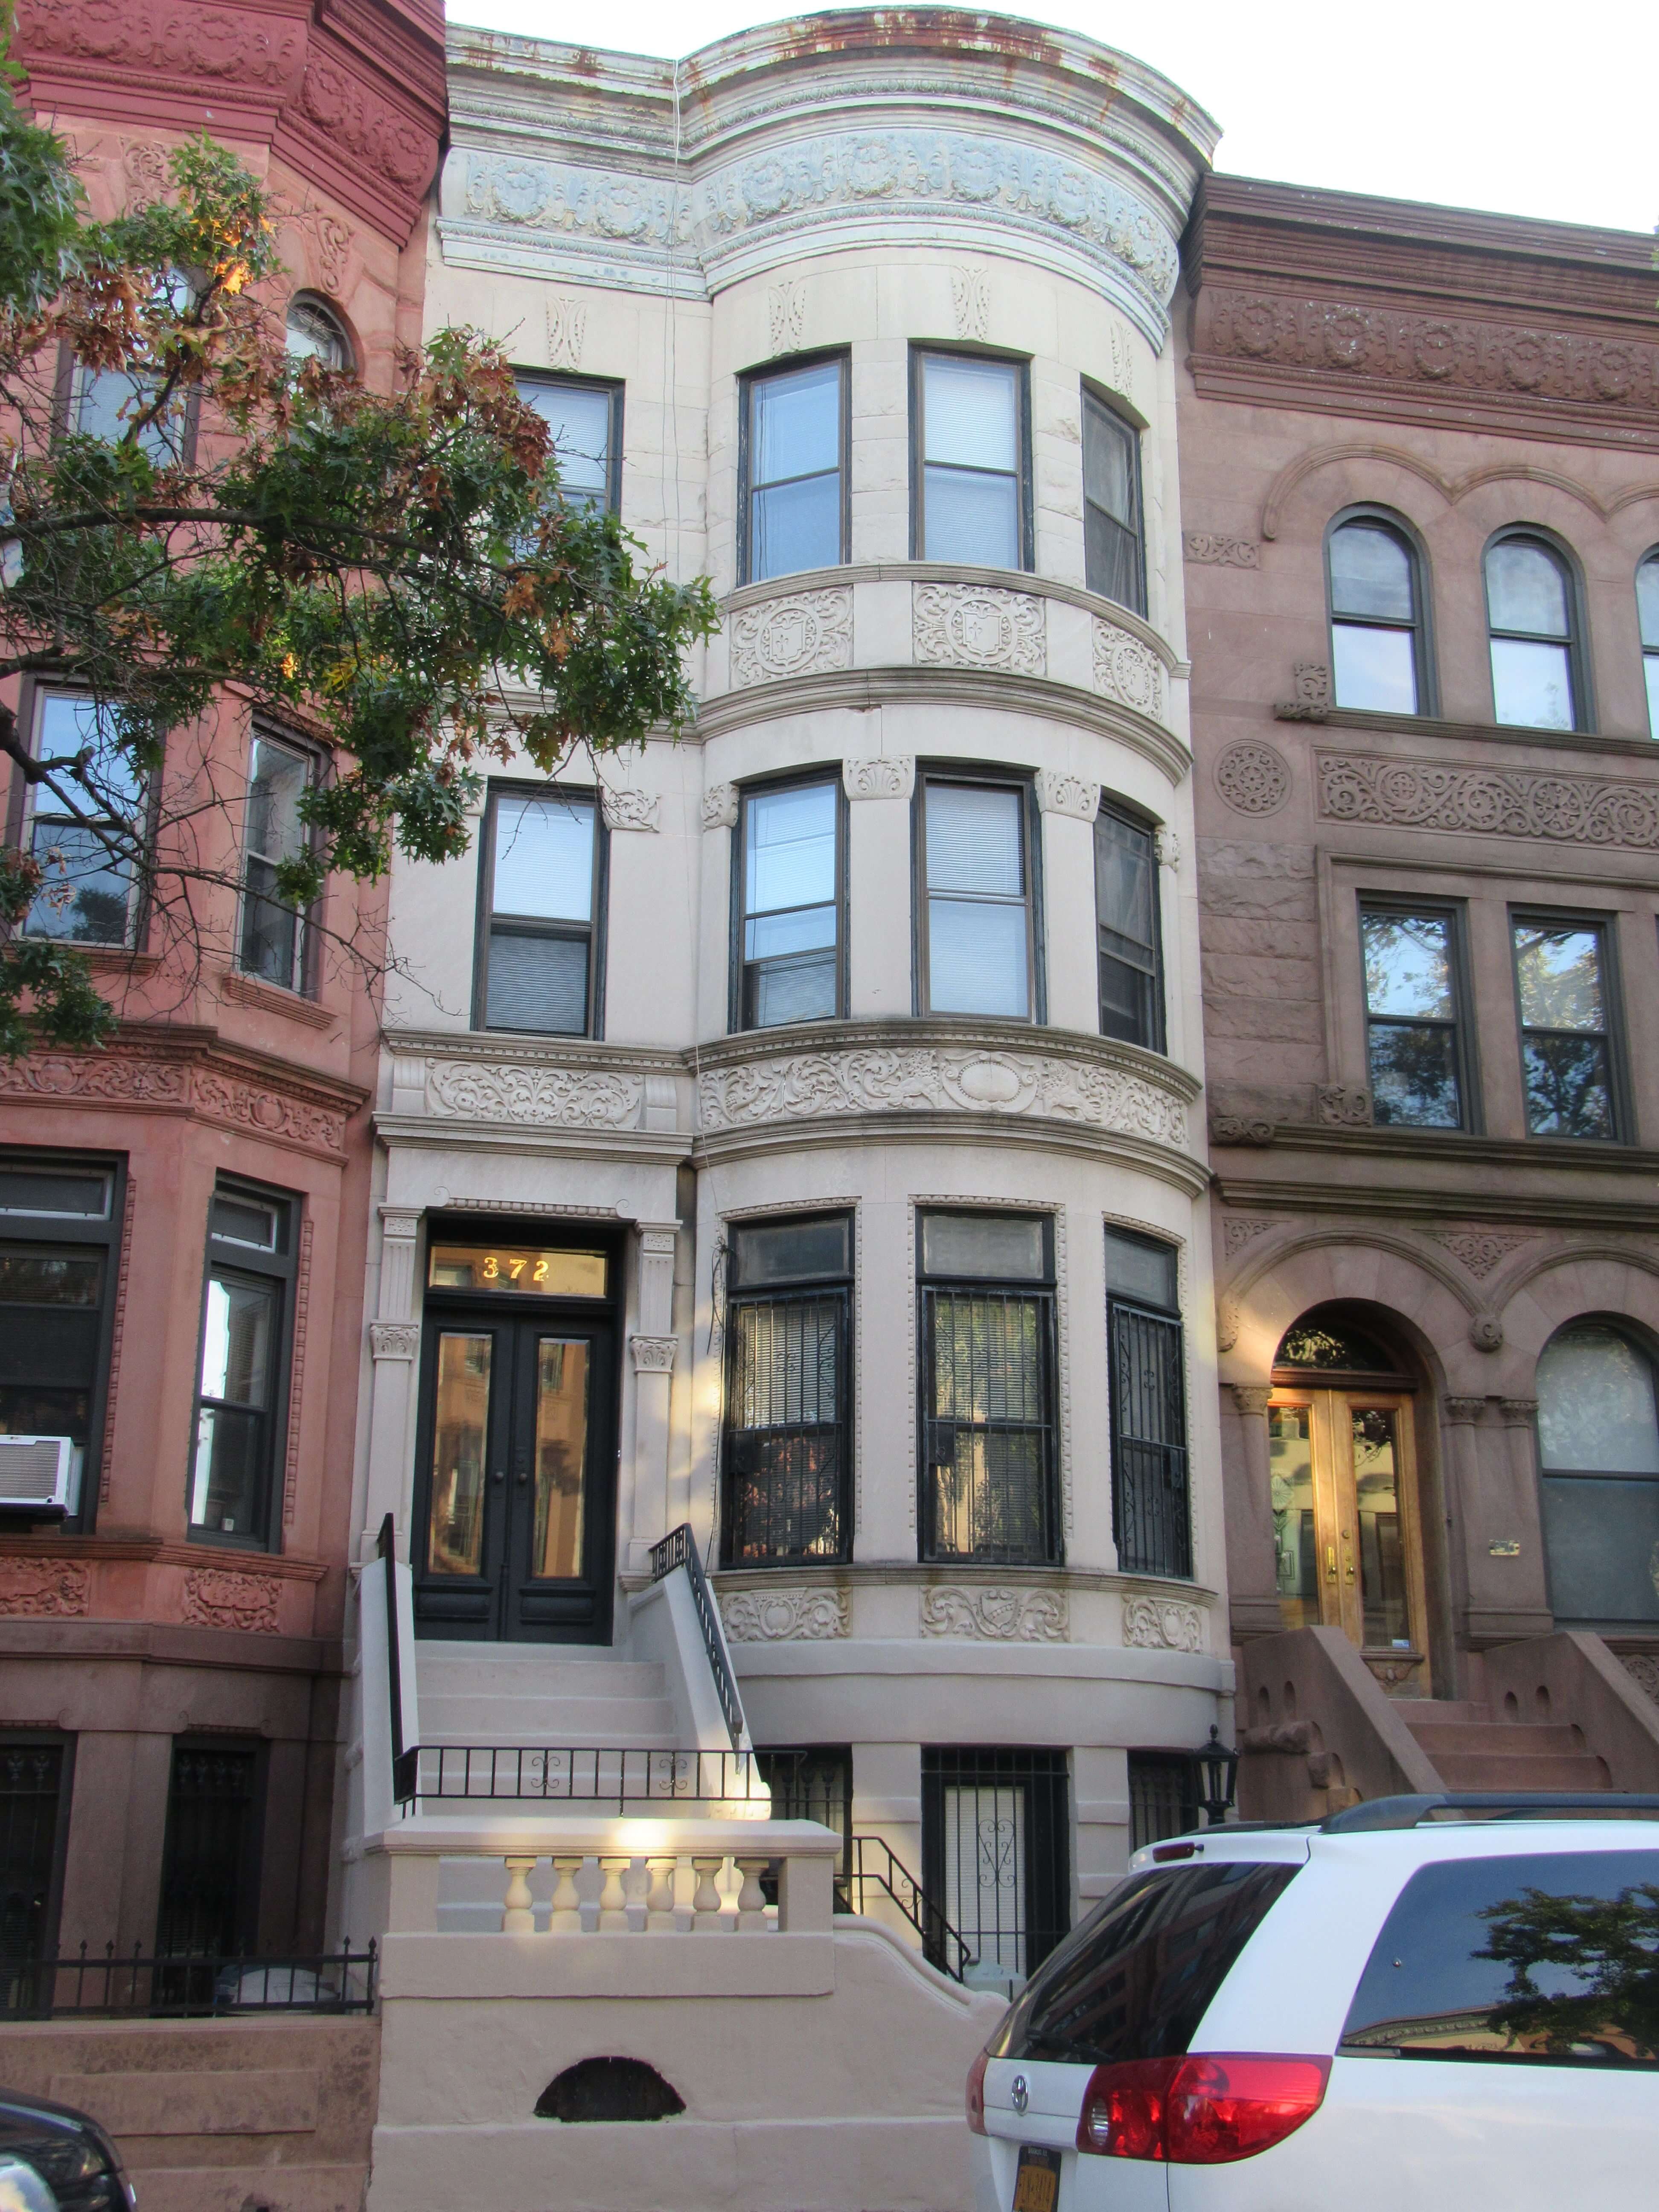 Brooklyn Homes for Sale in Prospect Heights, Prospect Park South, Greenpoint and Greenwood Heights